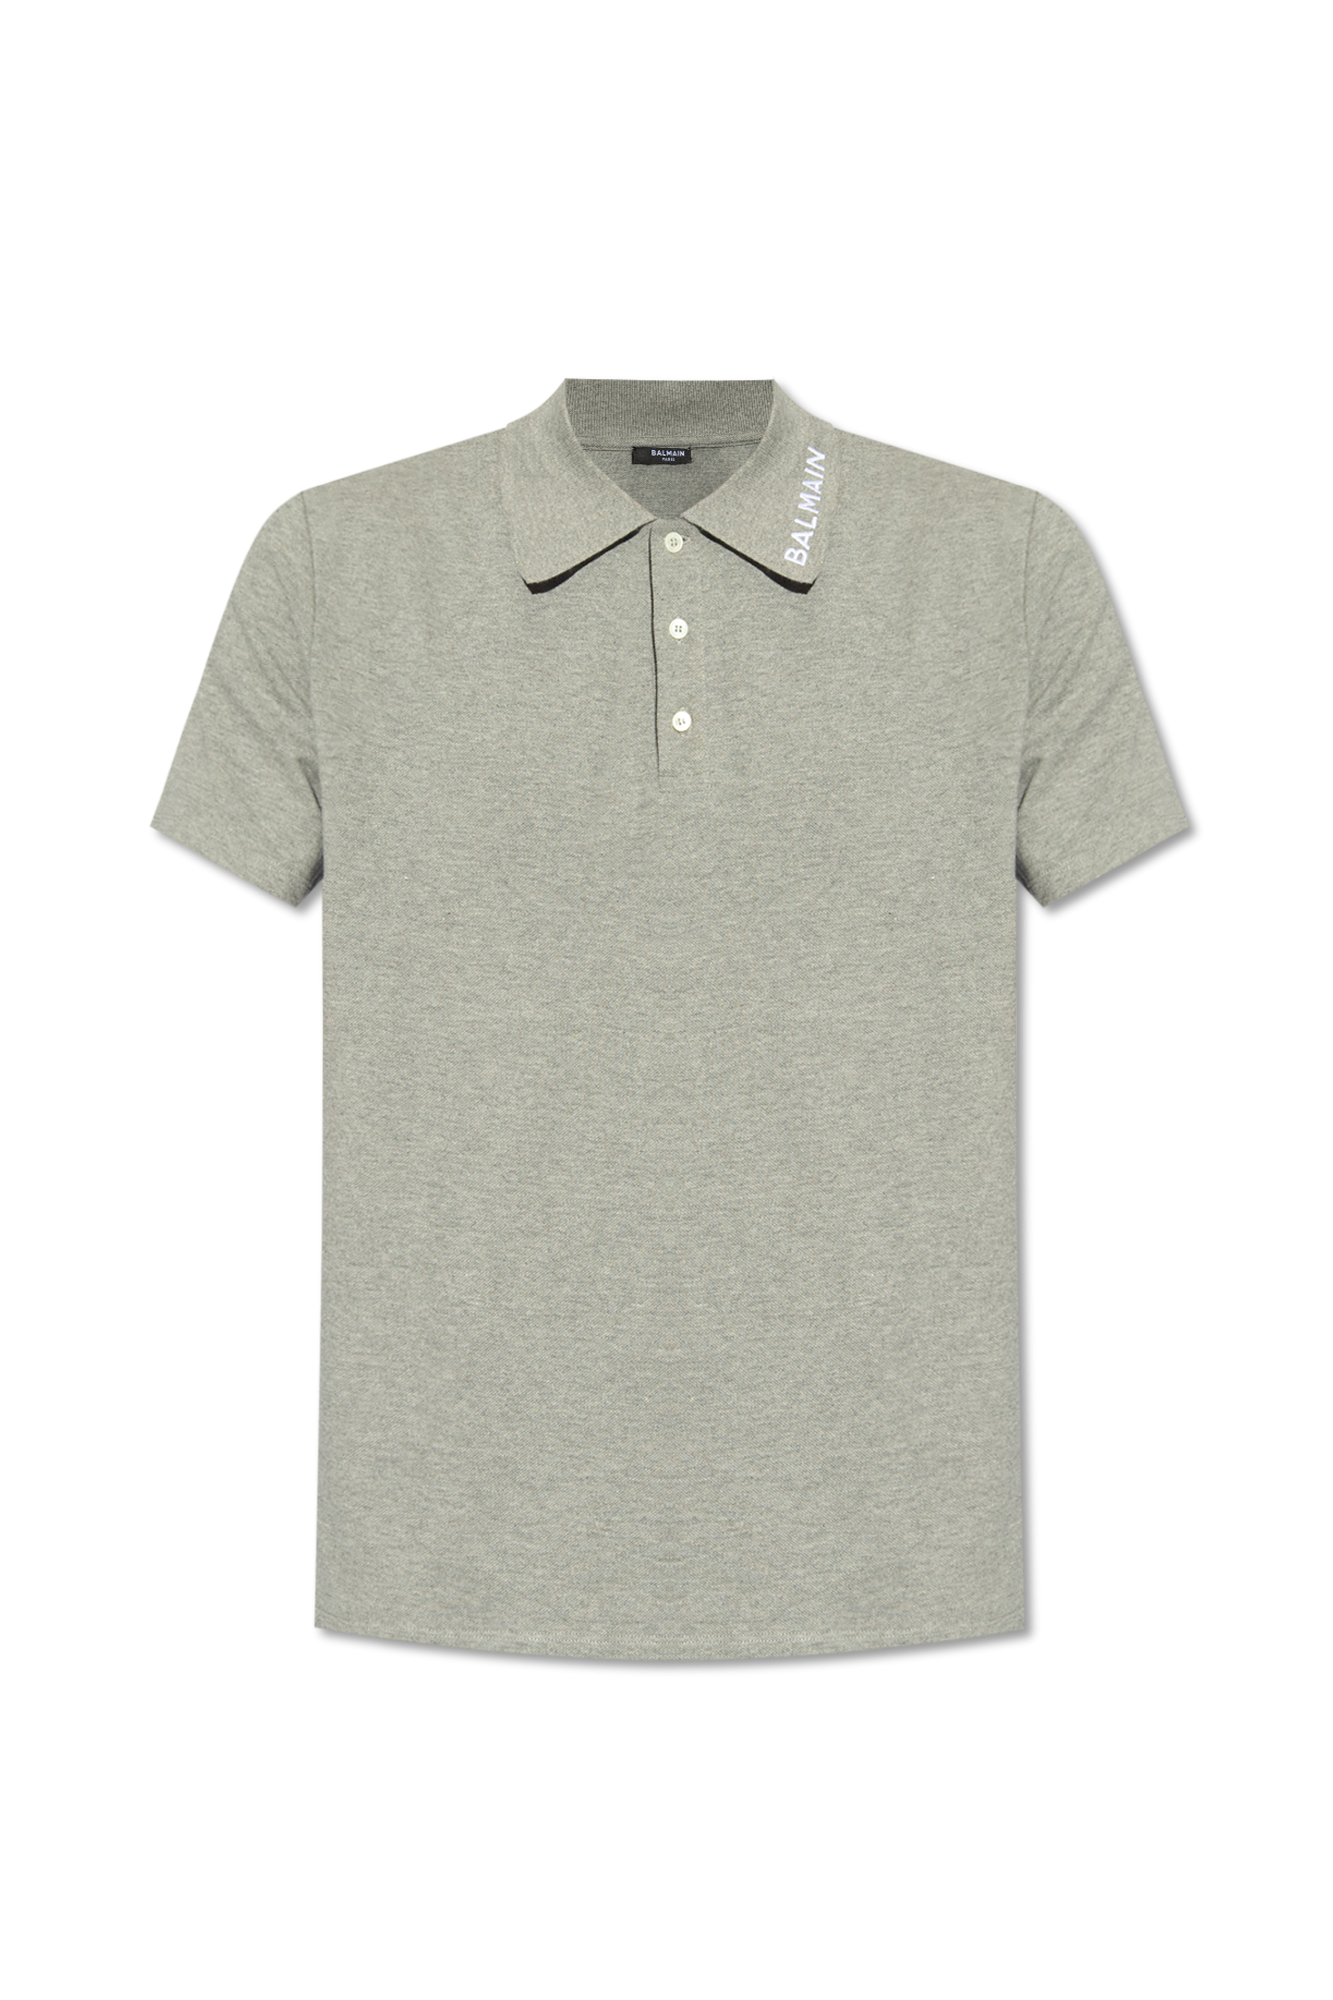 Golf polos explained: What is a golf polo shirt?